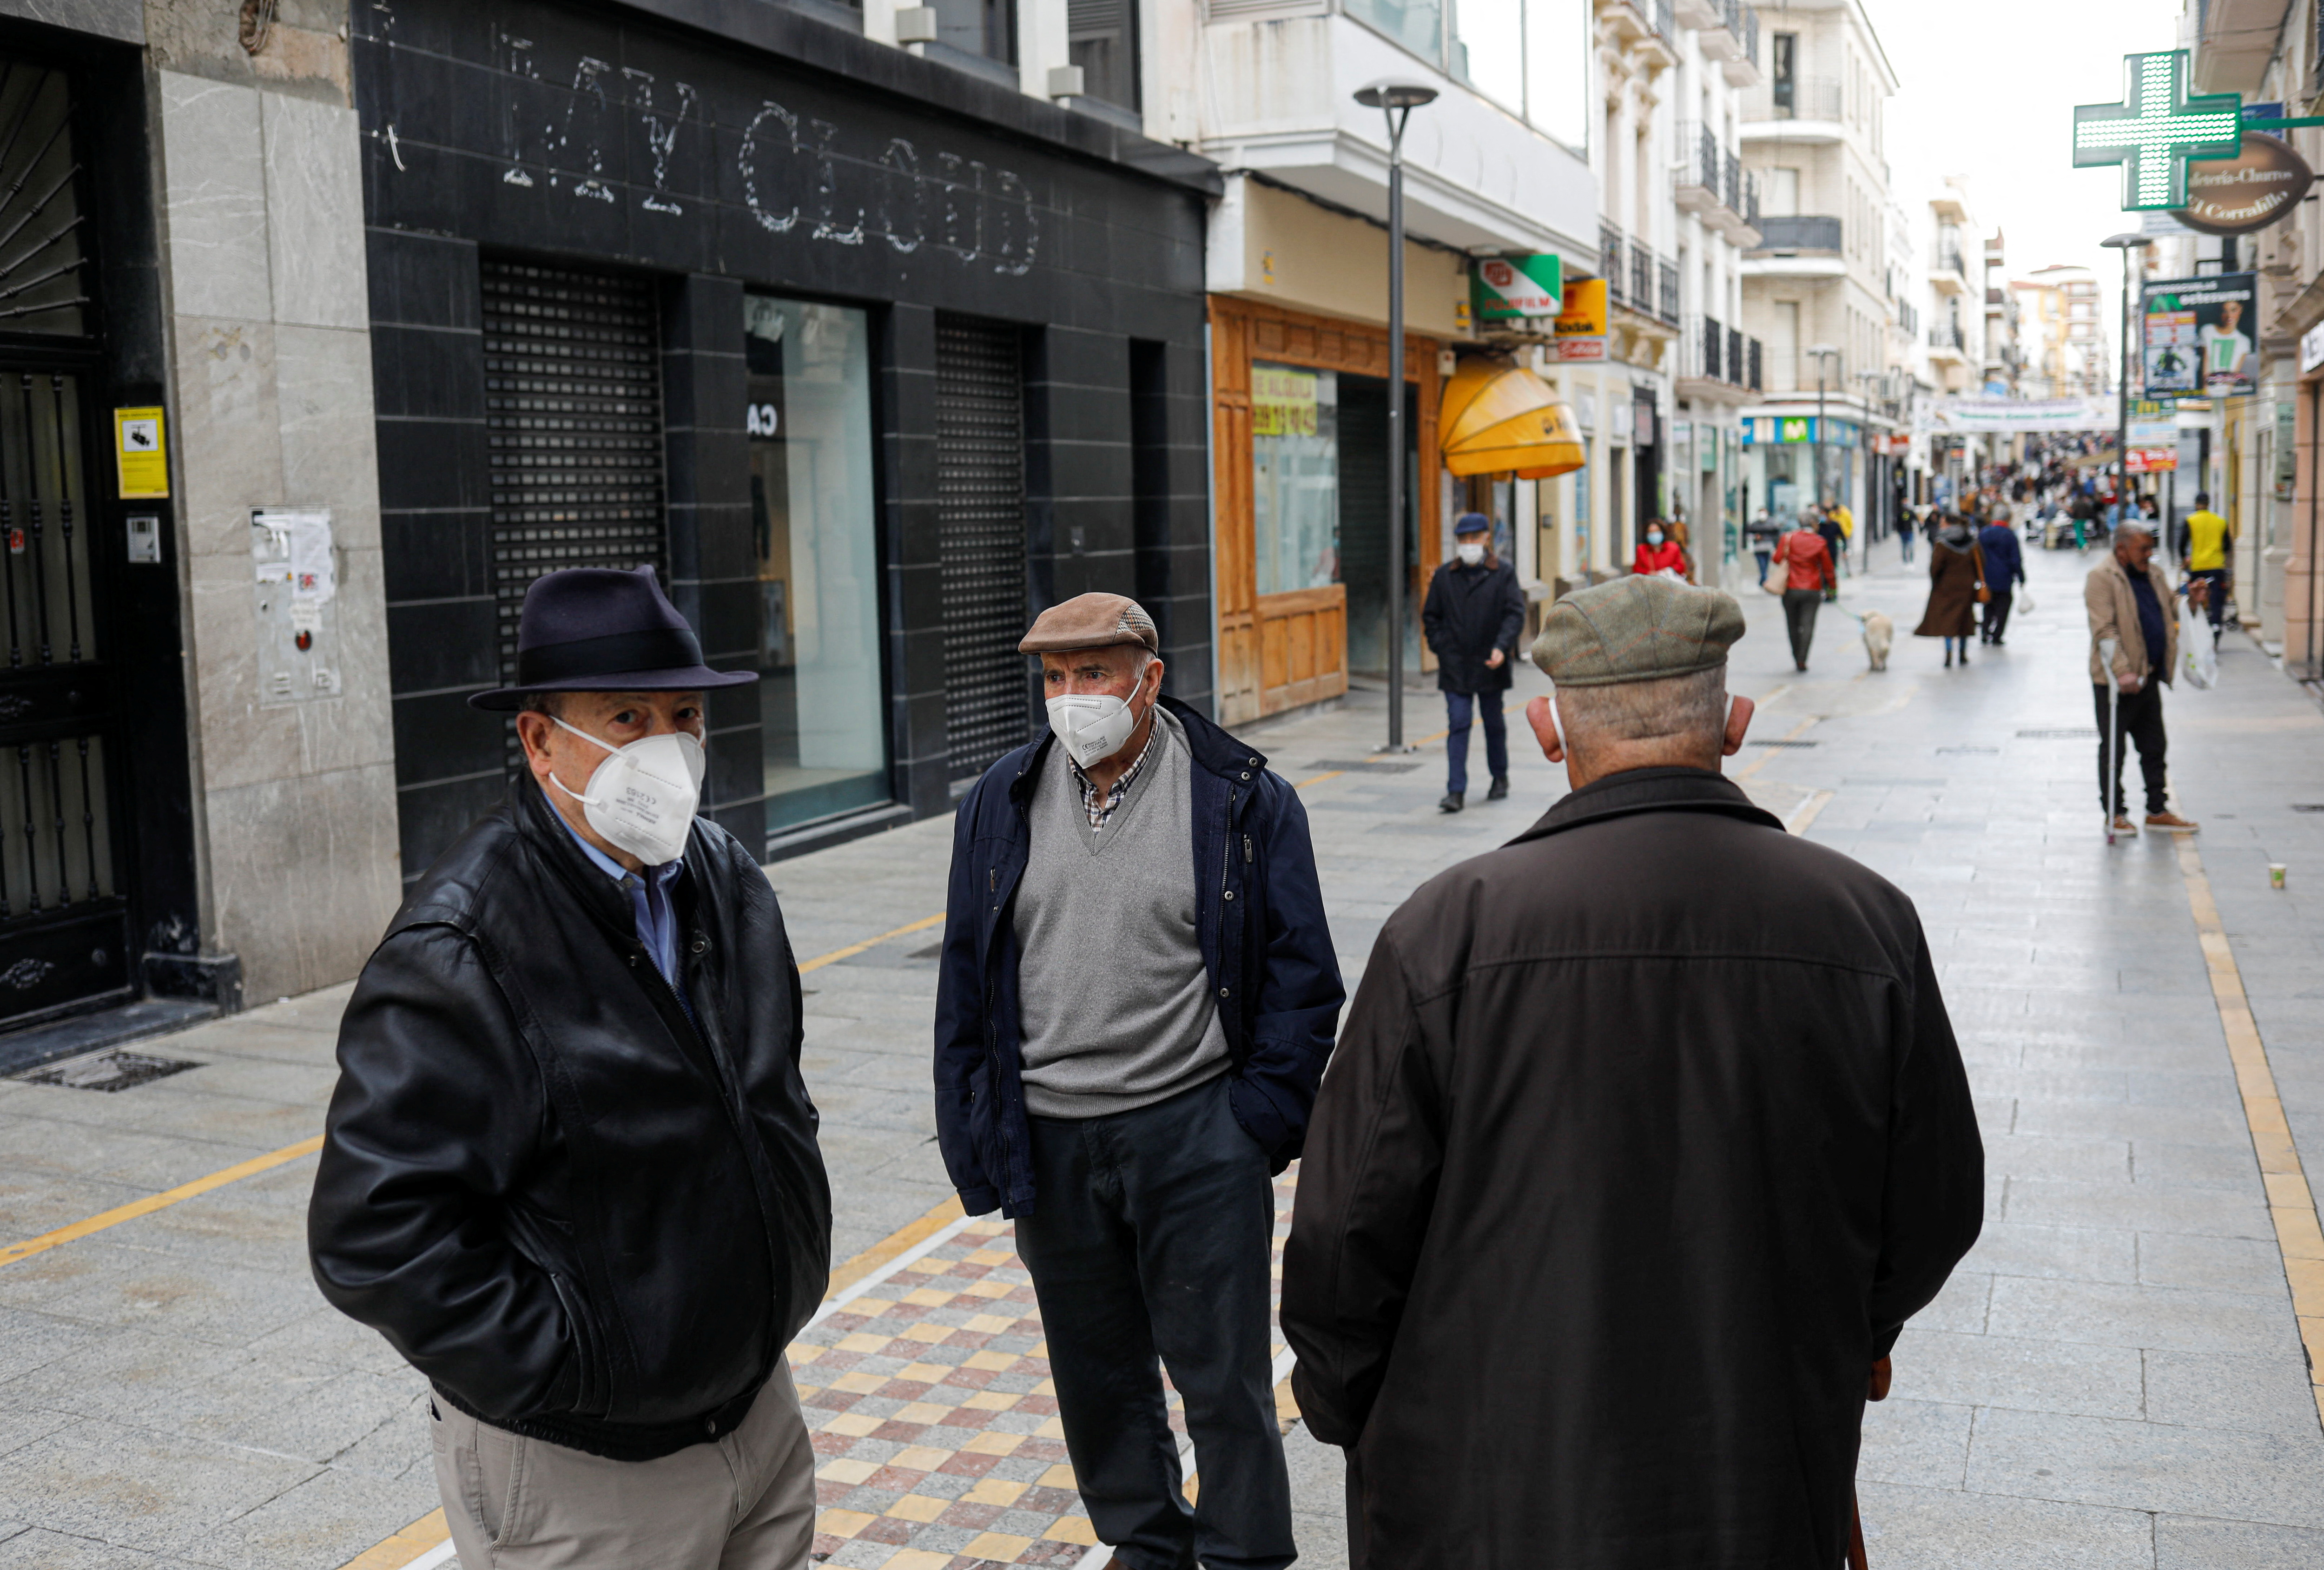 Pensioners wearing protective face masks due to COVID-19 pandemic chat in Ronda